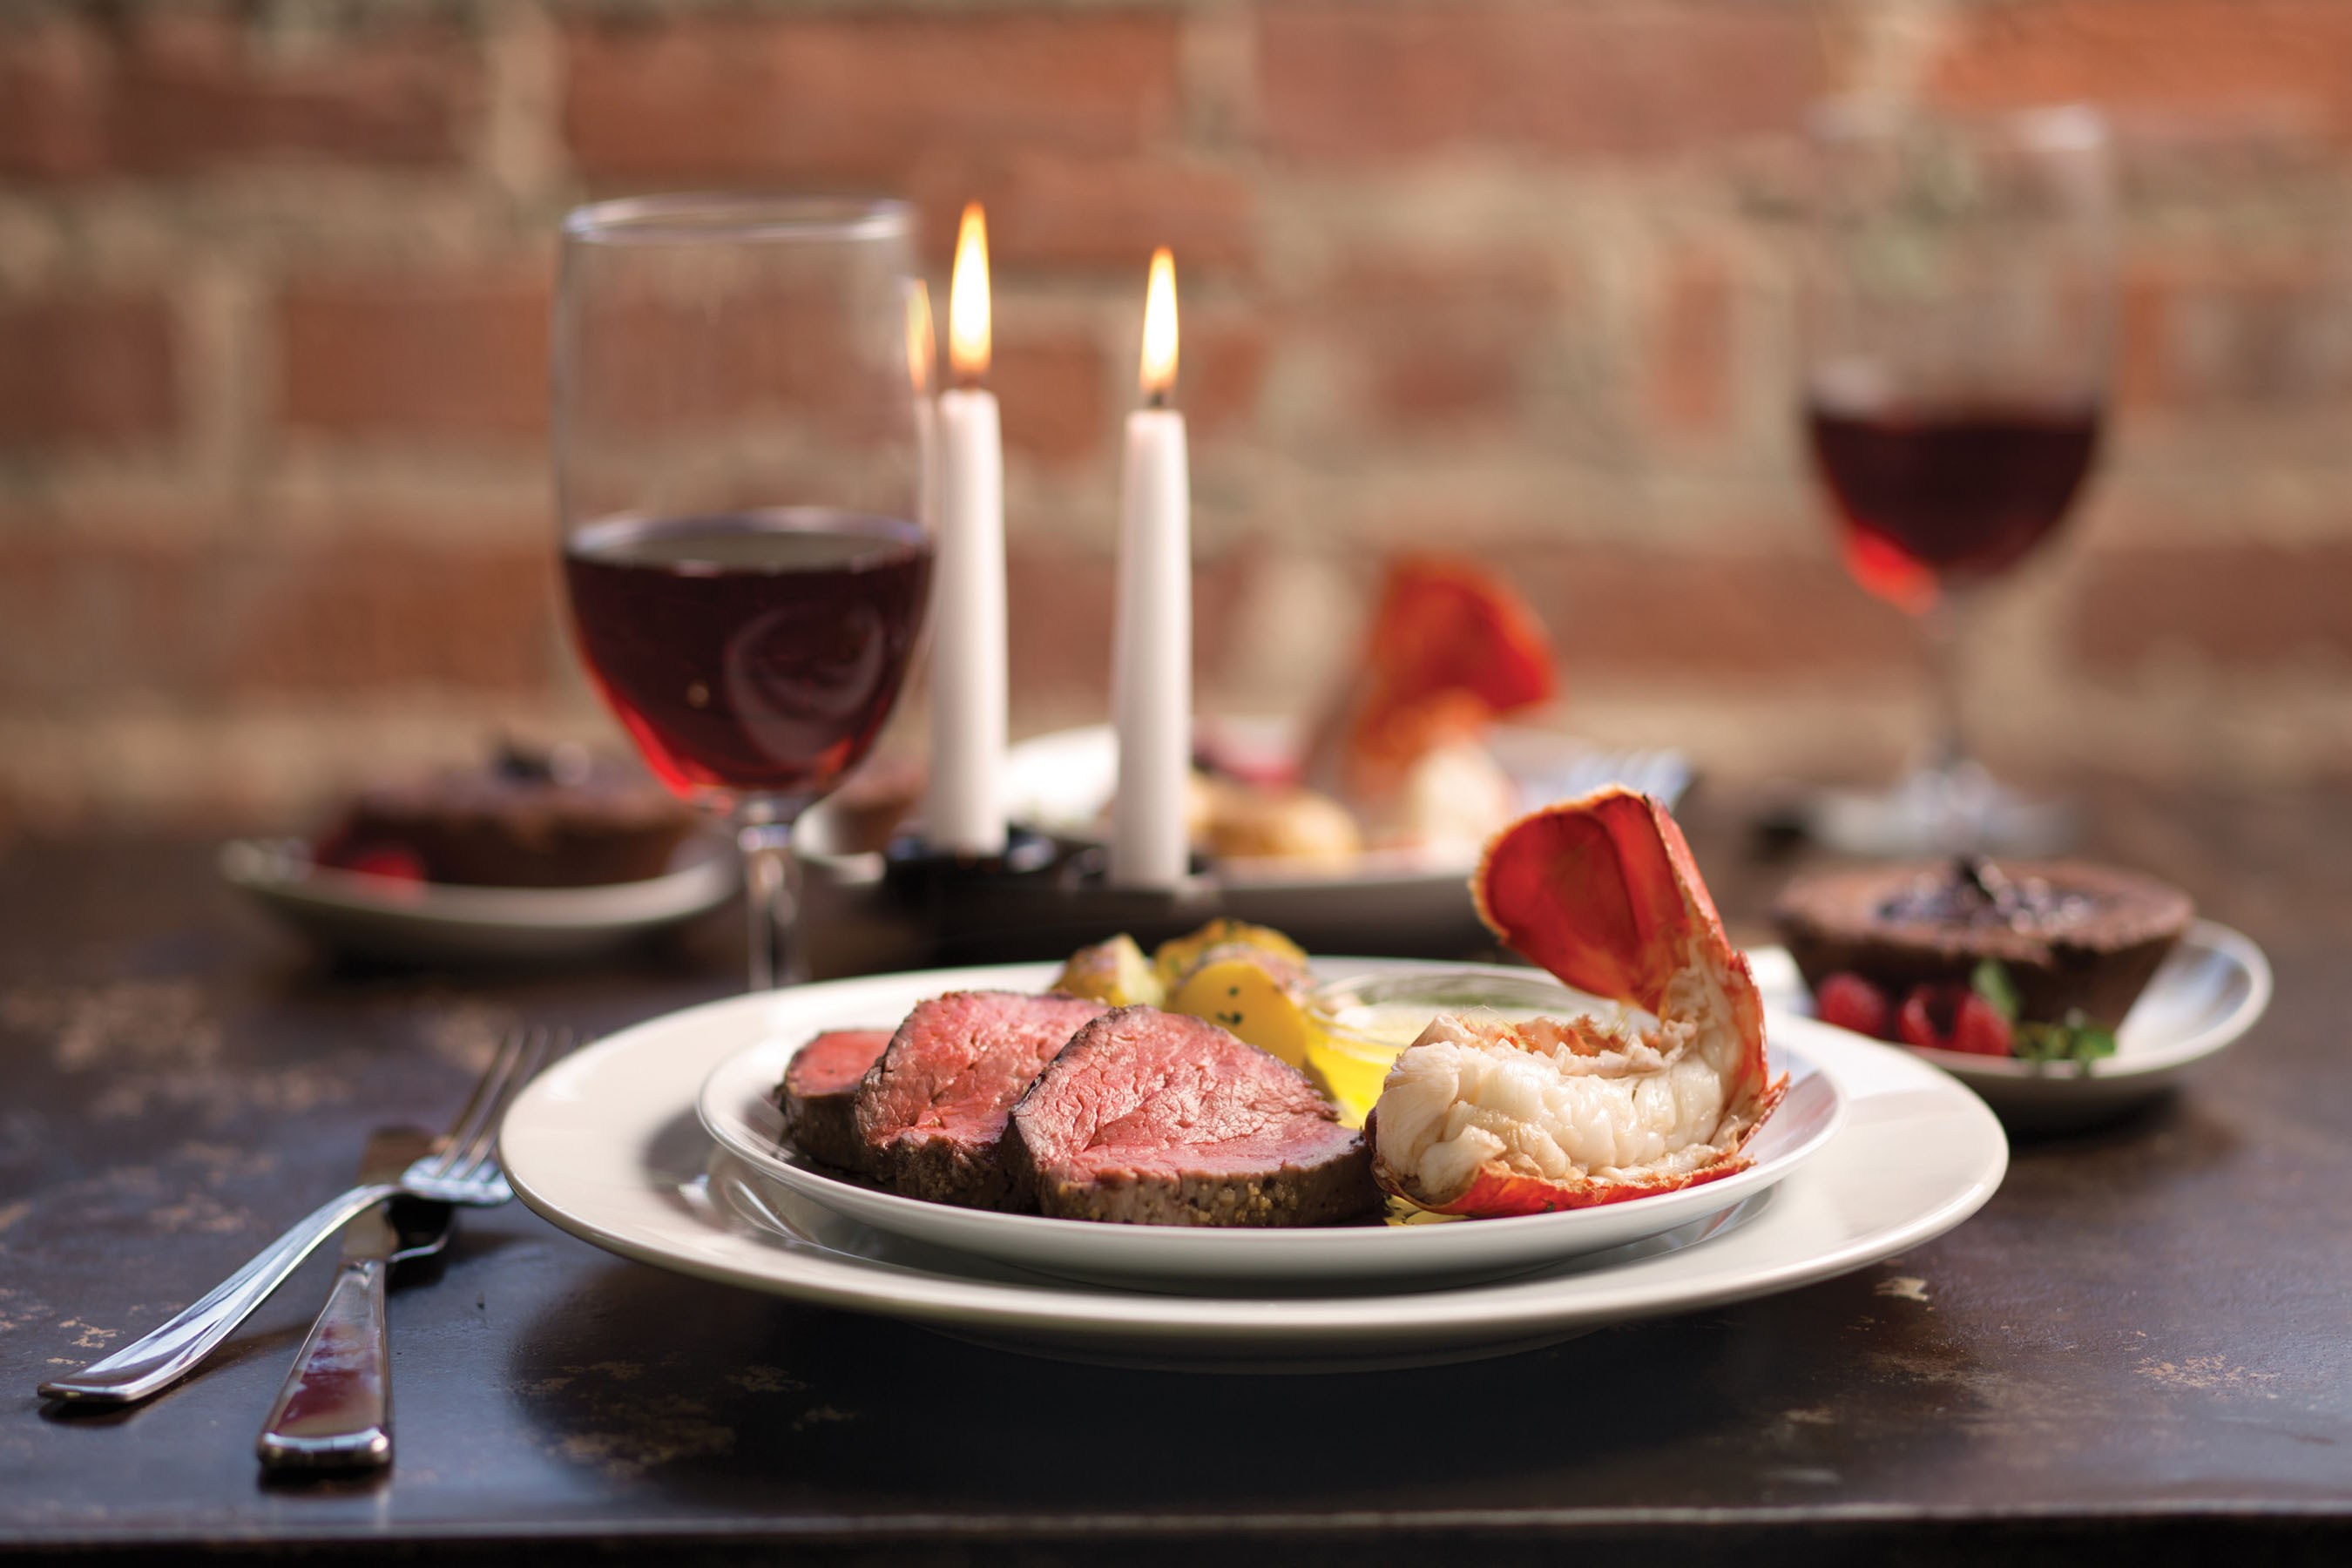 When it comes to Valentine's Day, the majority of Americans would enjoy a romantic dinner for two at home with steak and lobster as top choices for what's on the menu. (PRNewsFoto/Omaha Steaks) (PRNewsFoto/OMAHA STEAKS)